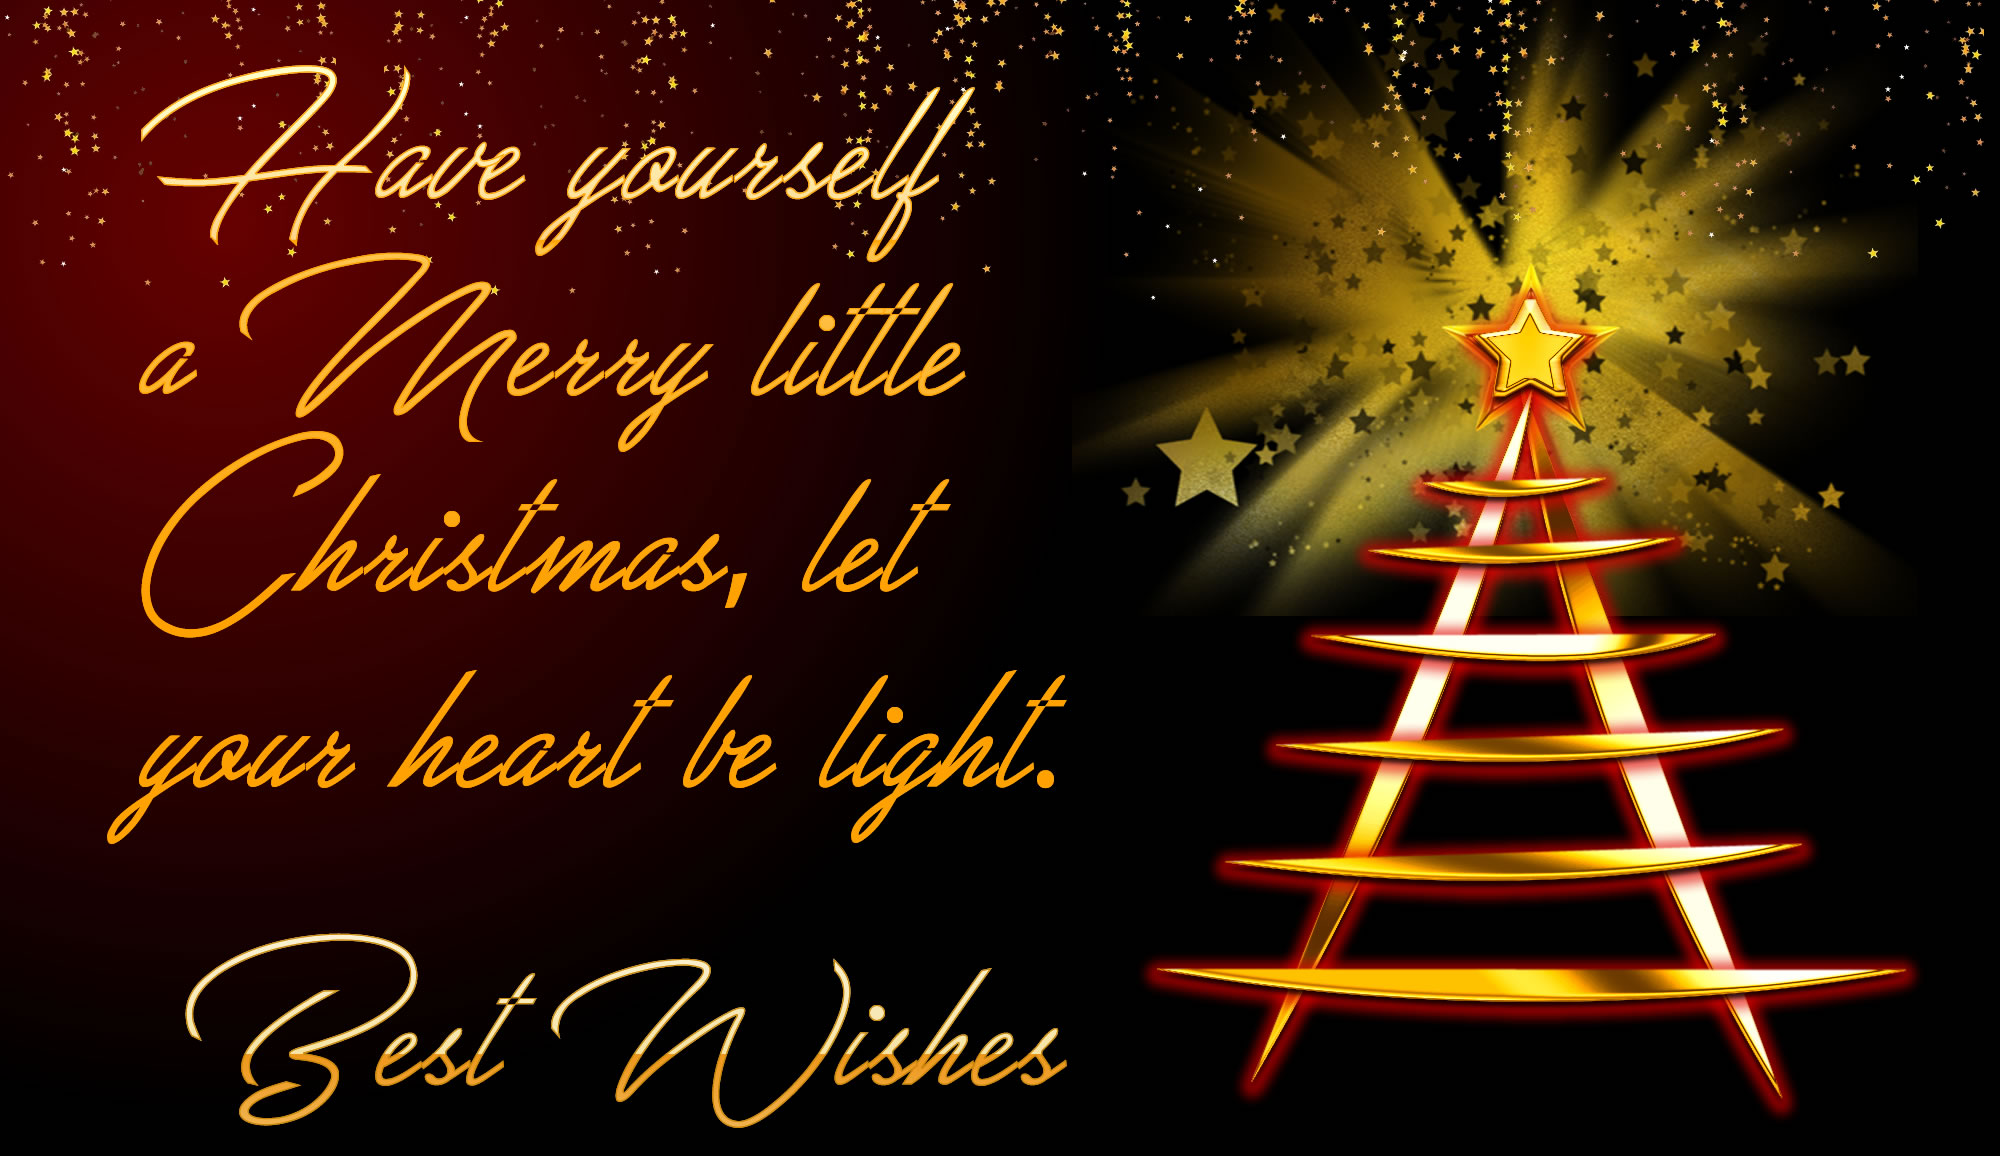 Image with shimmering christmas tree and dedication with text.